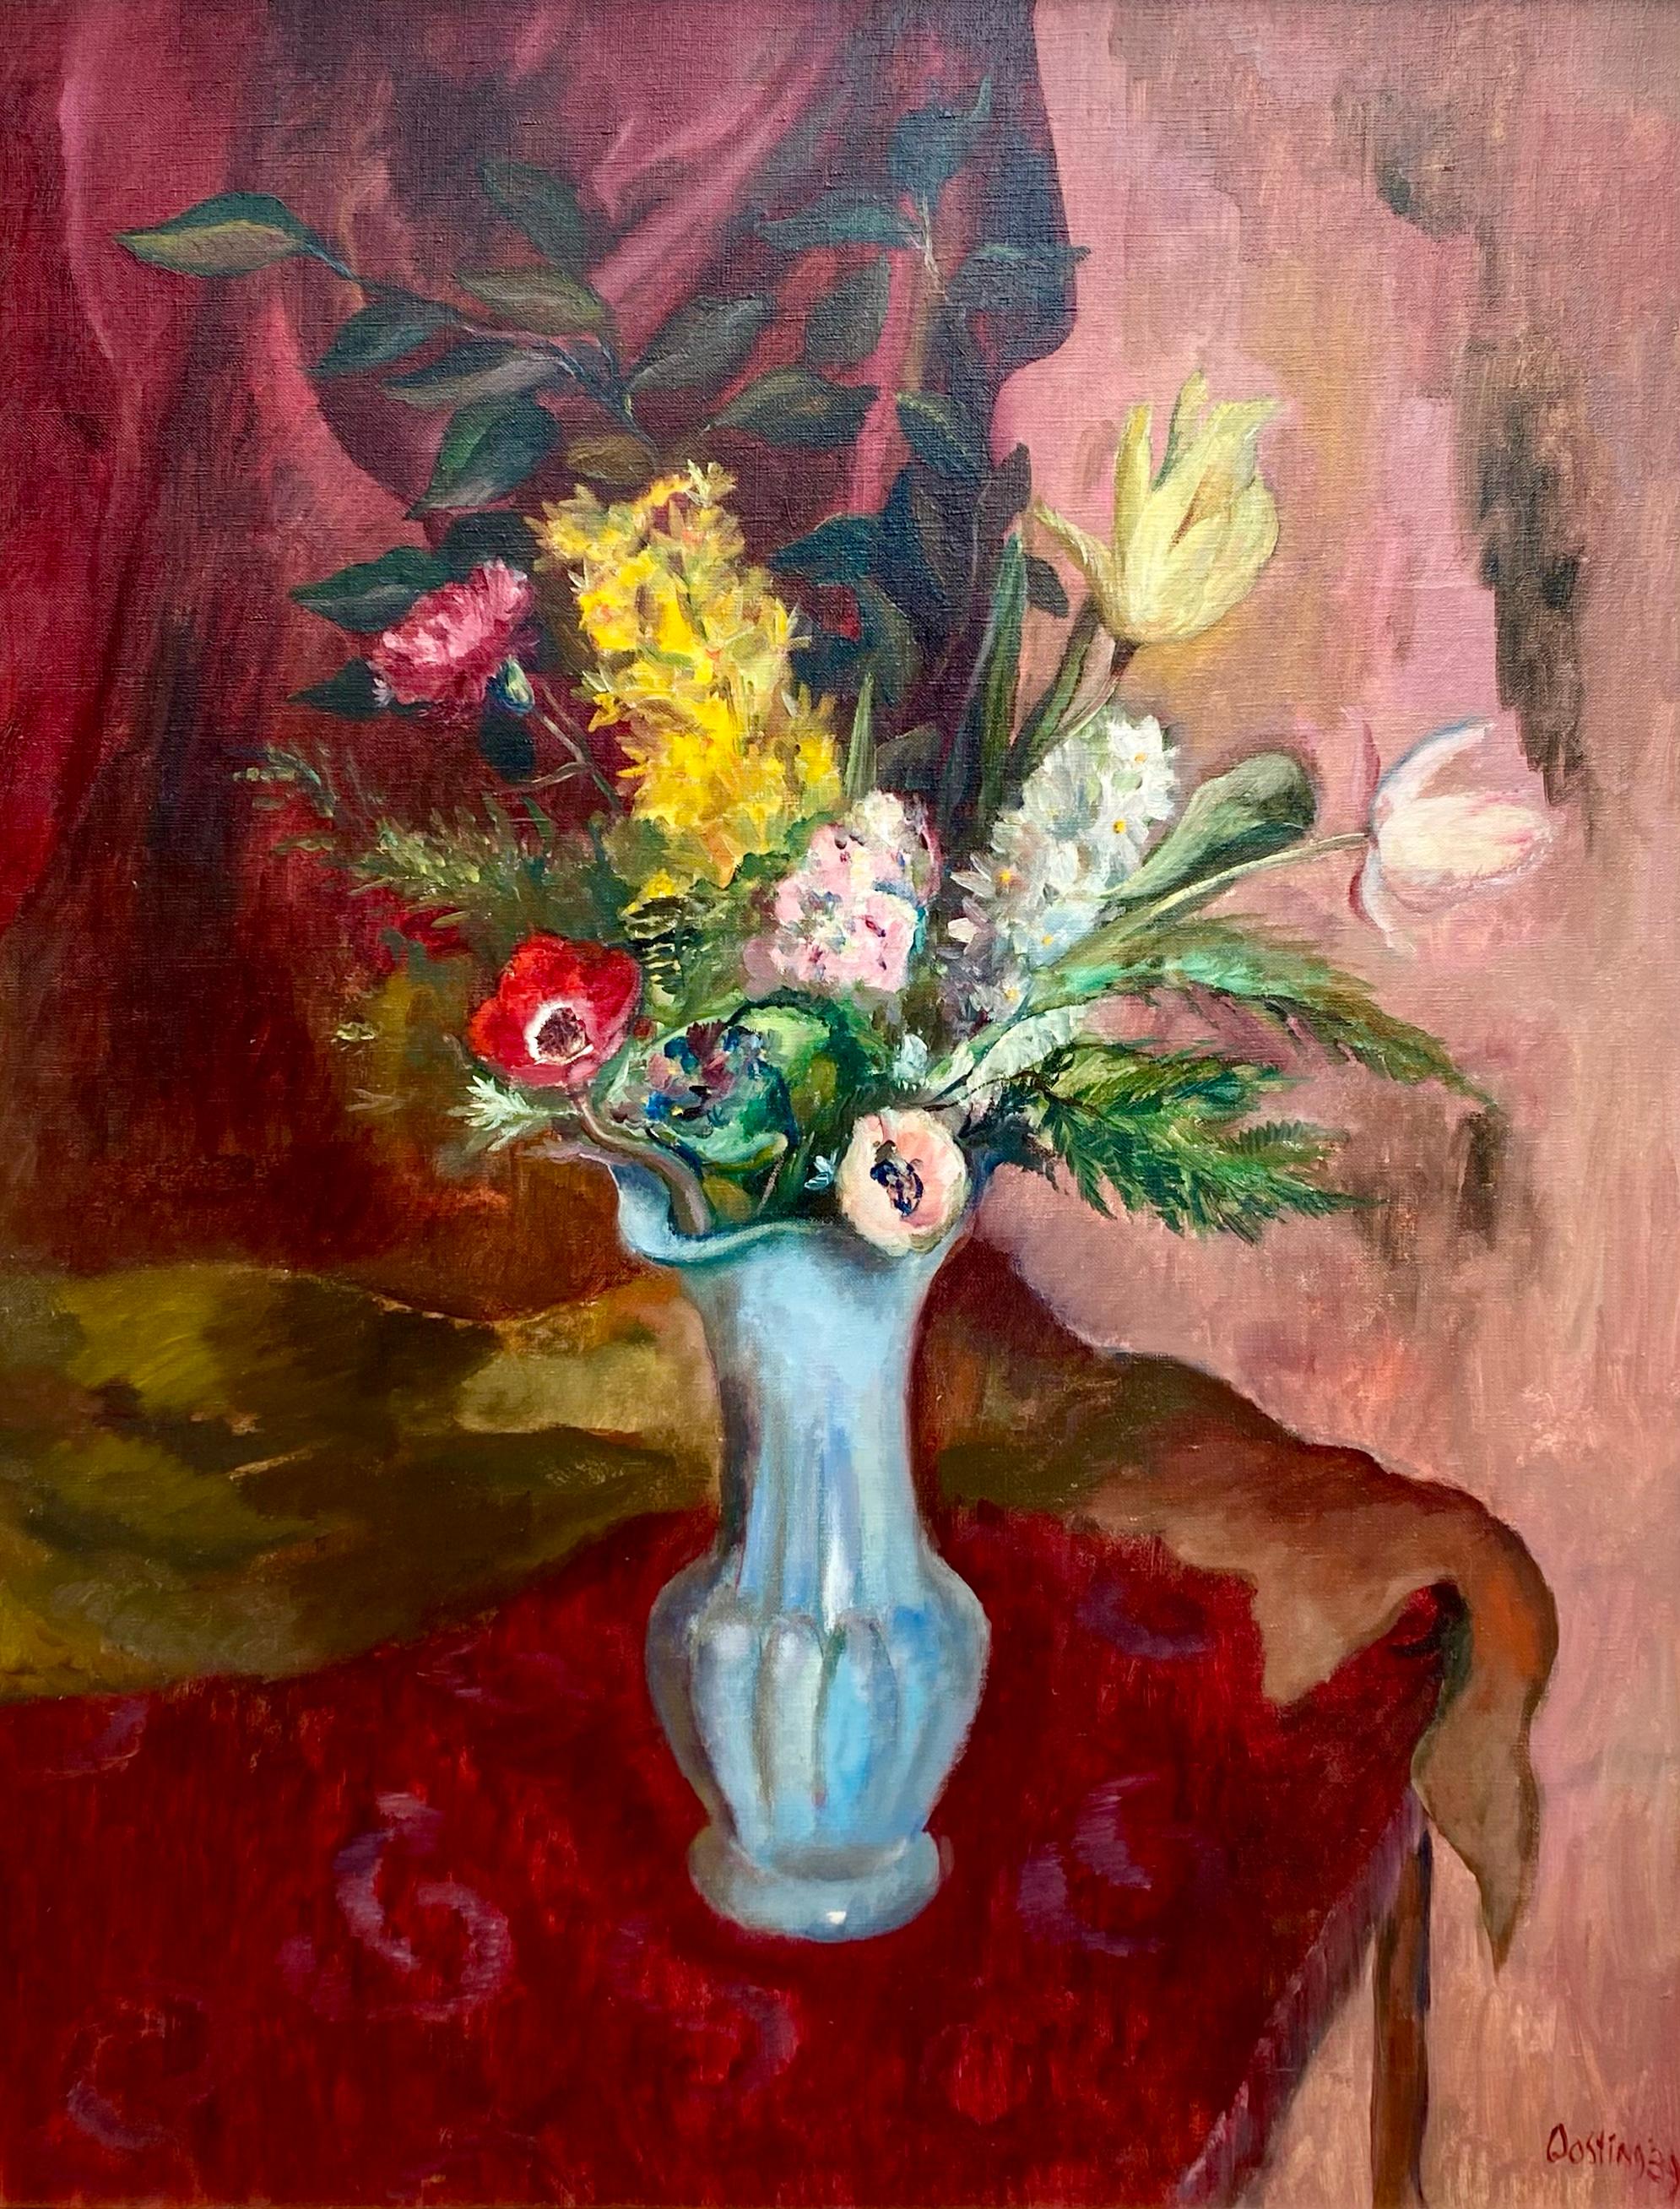 'Spring Flowers in a Vase' by Jeanne Bieruma Oosting, 1898 - 1994, Dutch For Sale 1